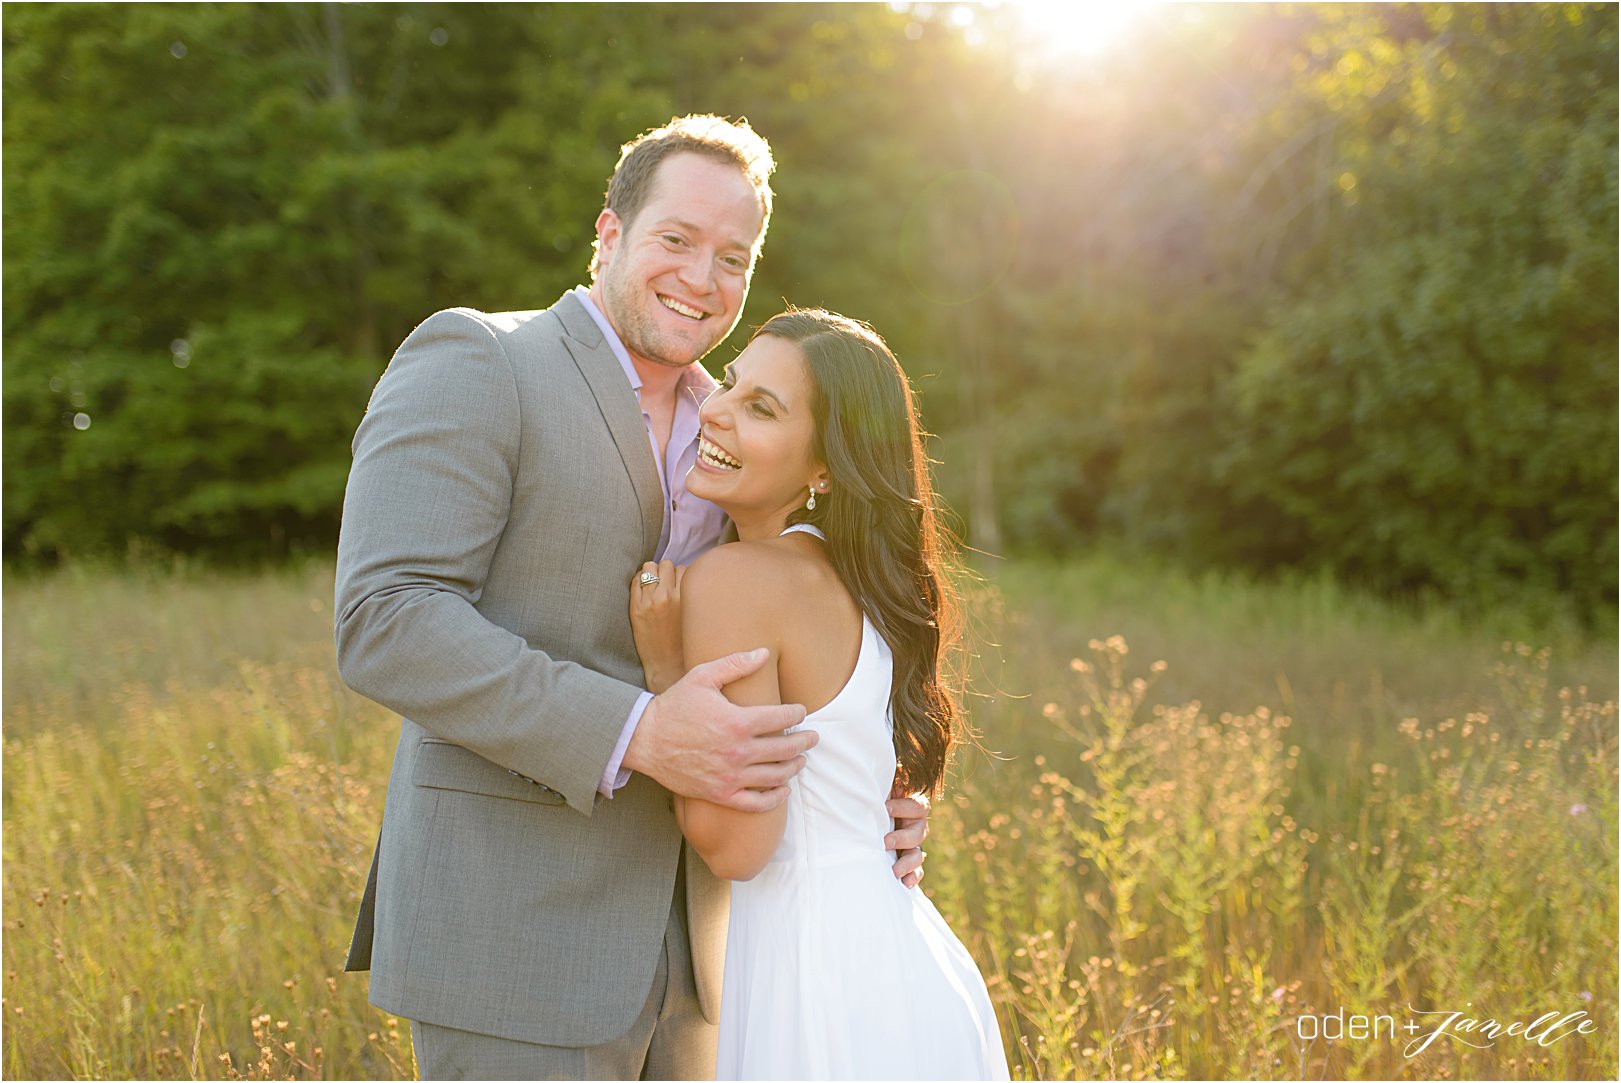 ELENA + JESSE | Oden and Janelle Photography 2016 |ODE_4946|12.jpg